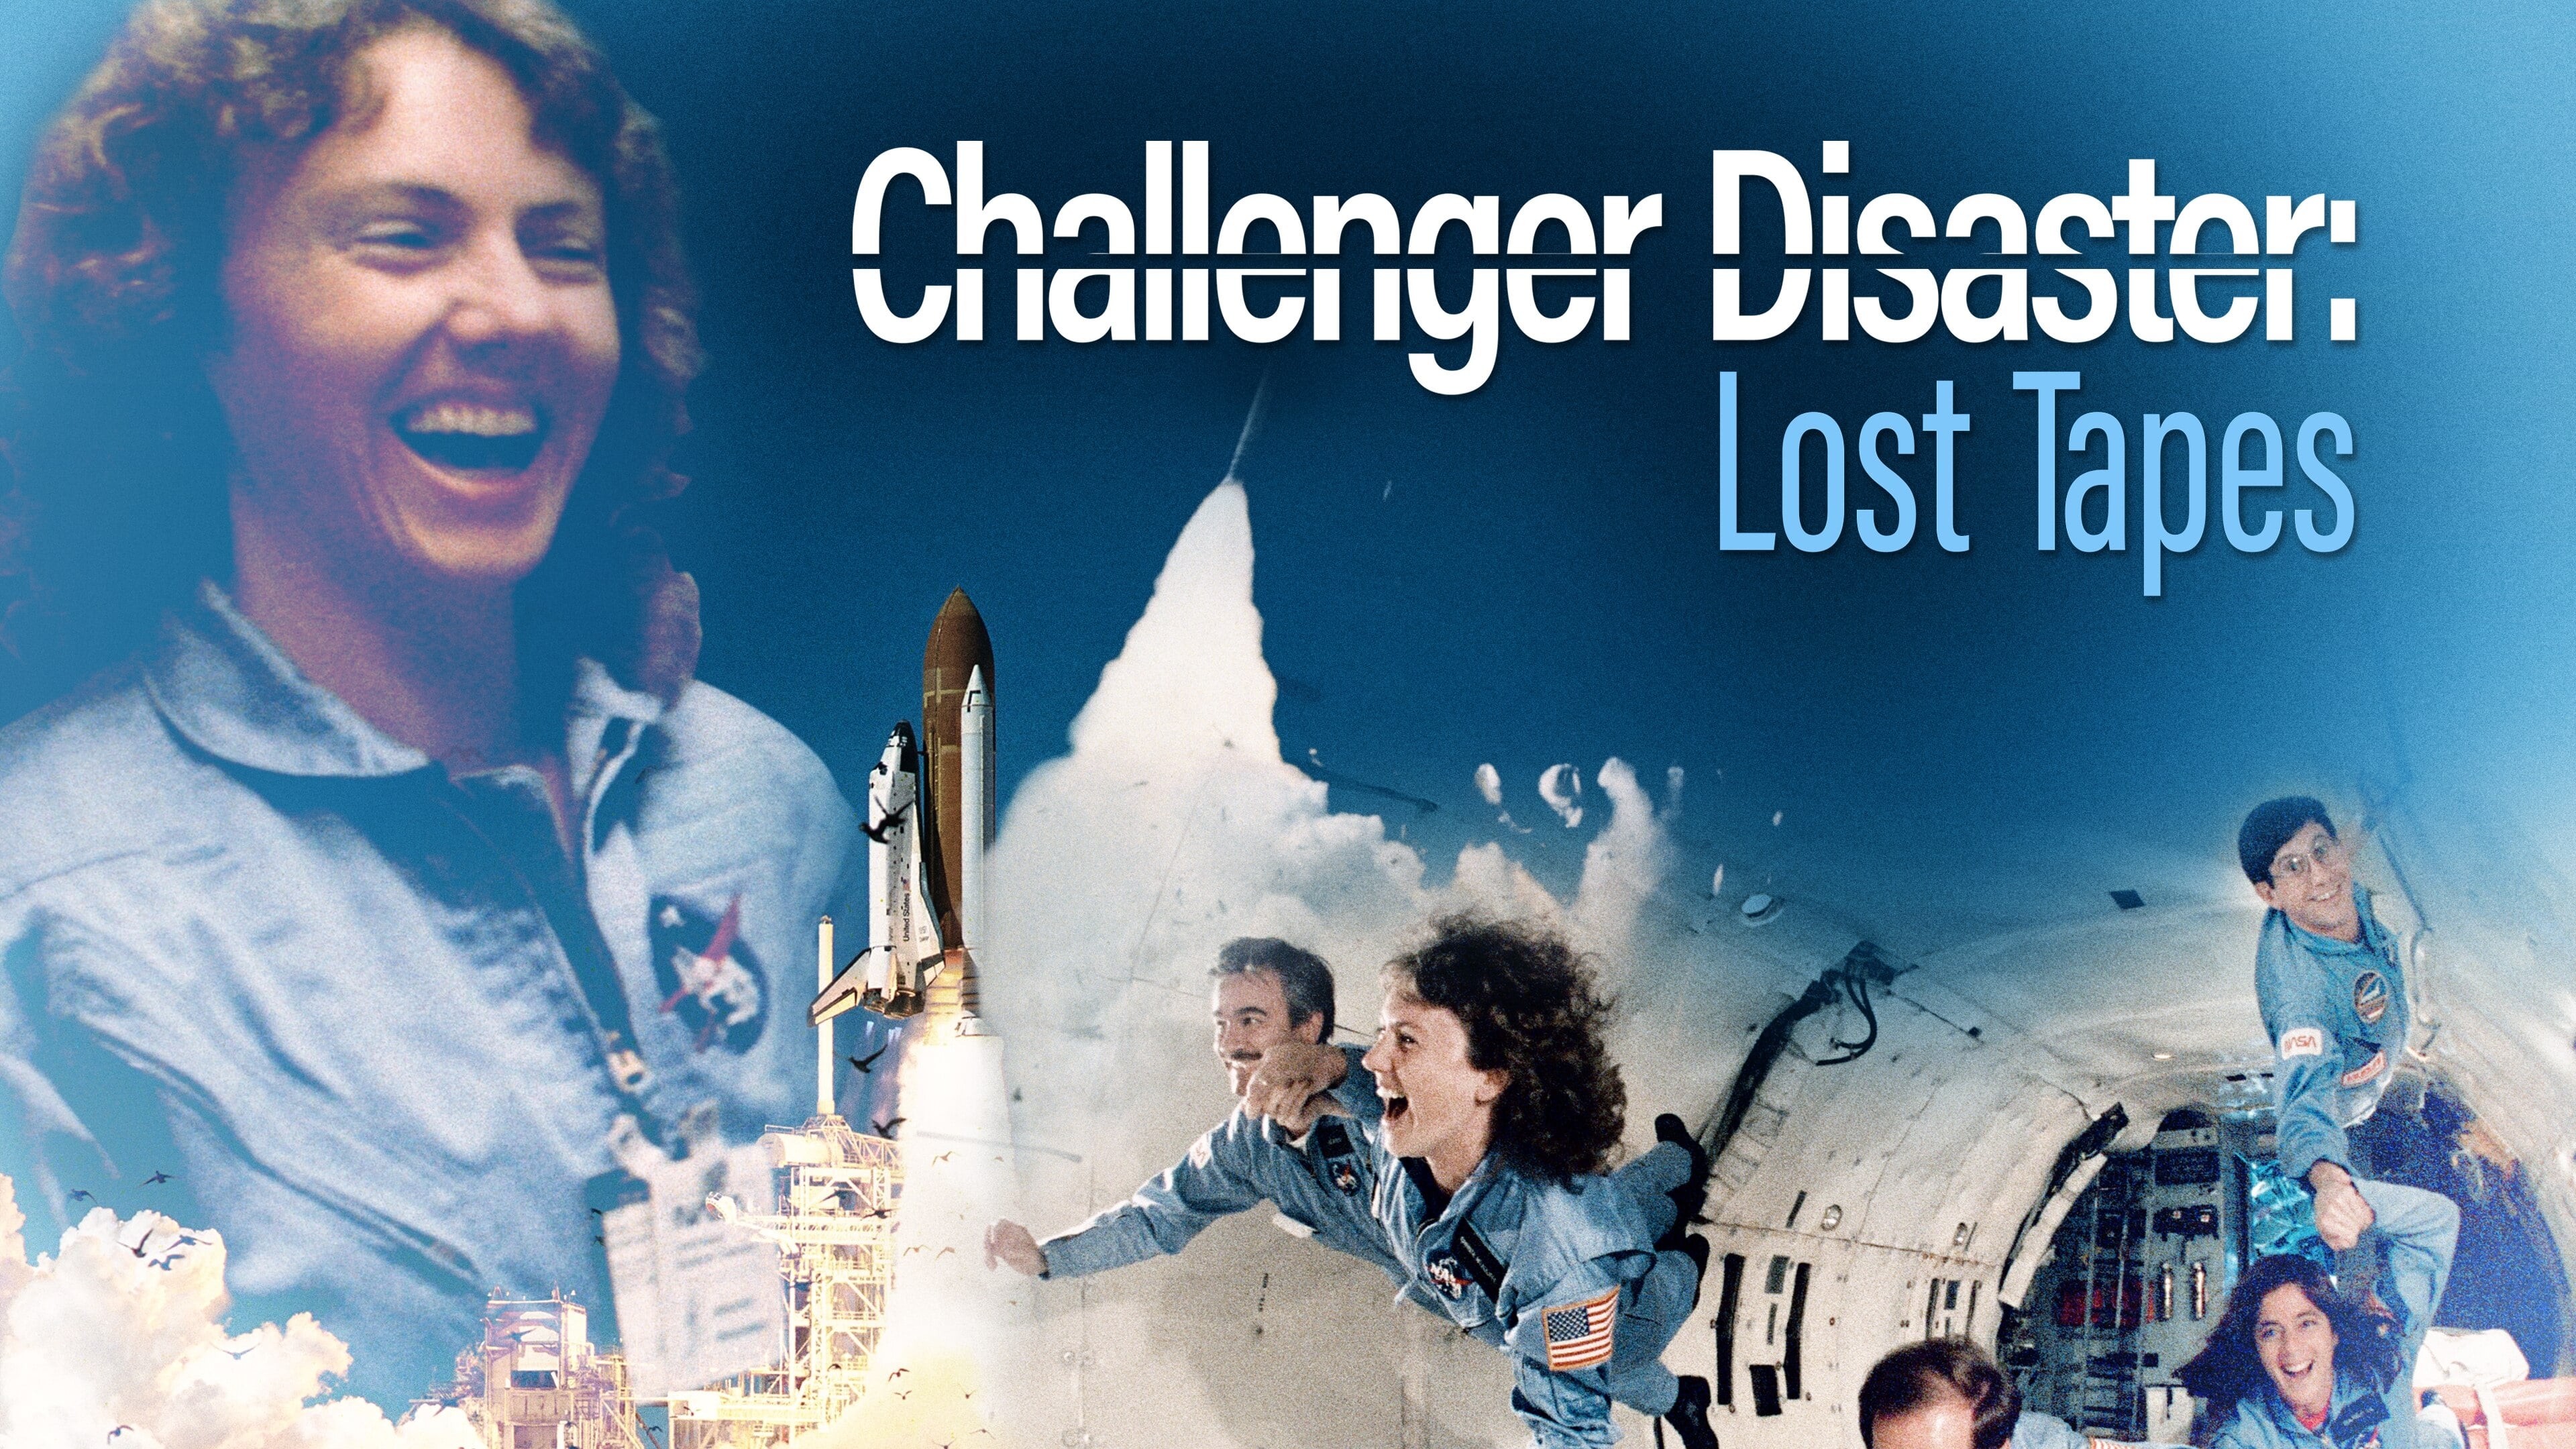 The Challenger Disaster: Lost Tapes (2016)